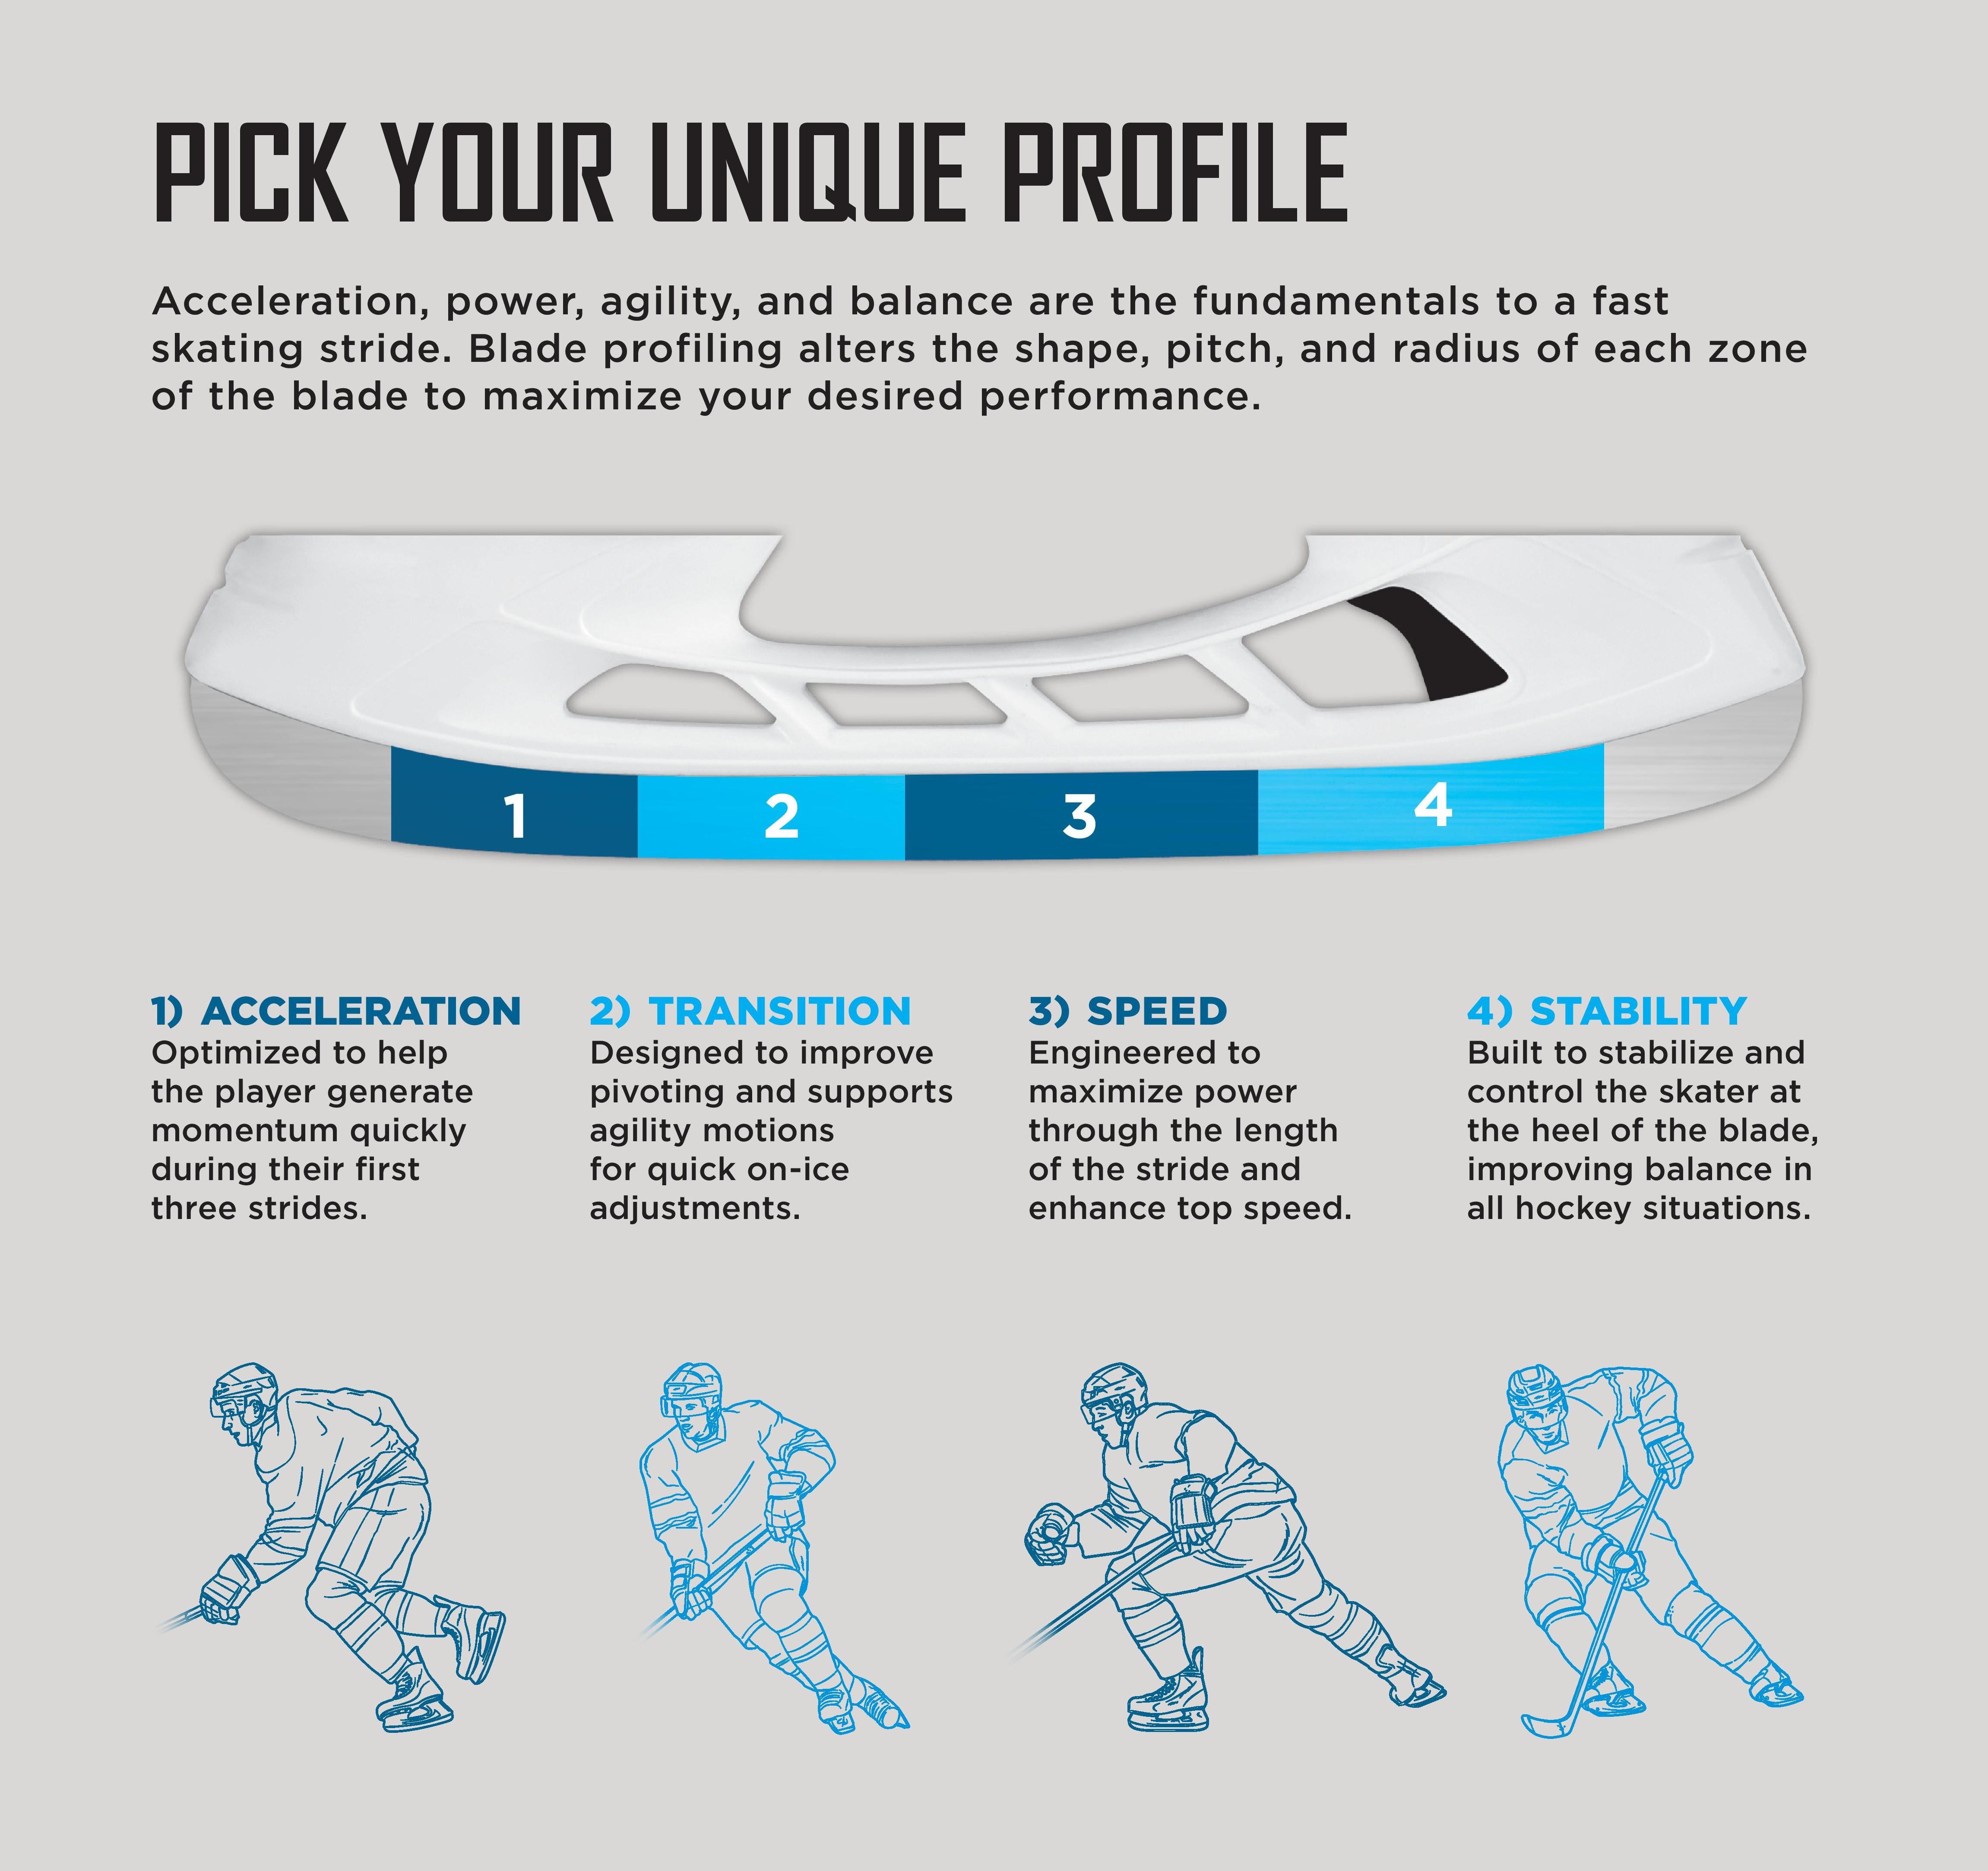 The Four Zones of Every Hockey Blade